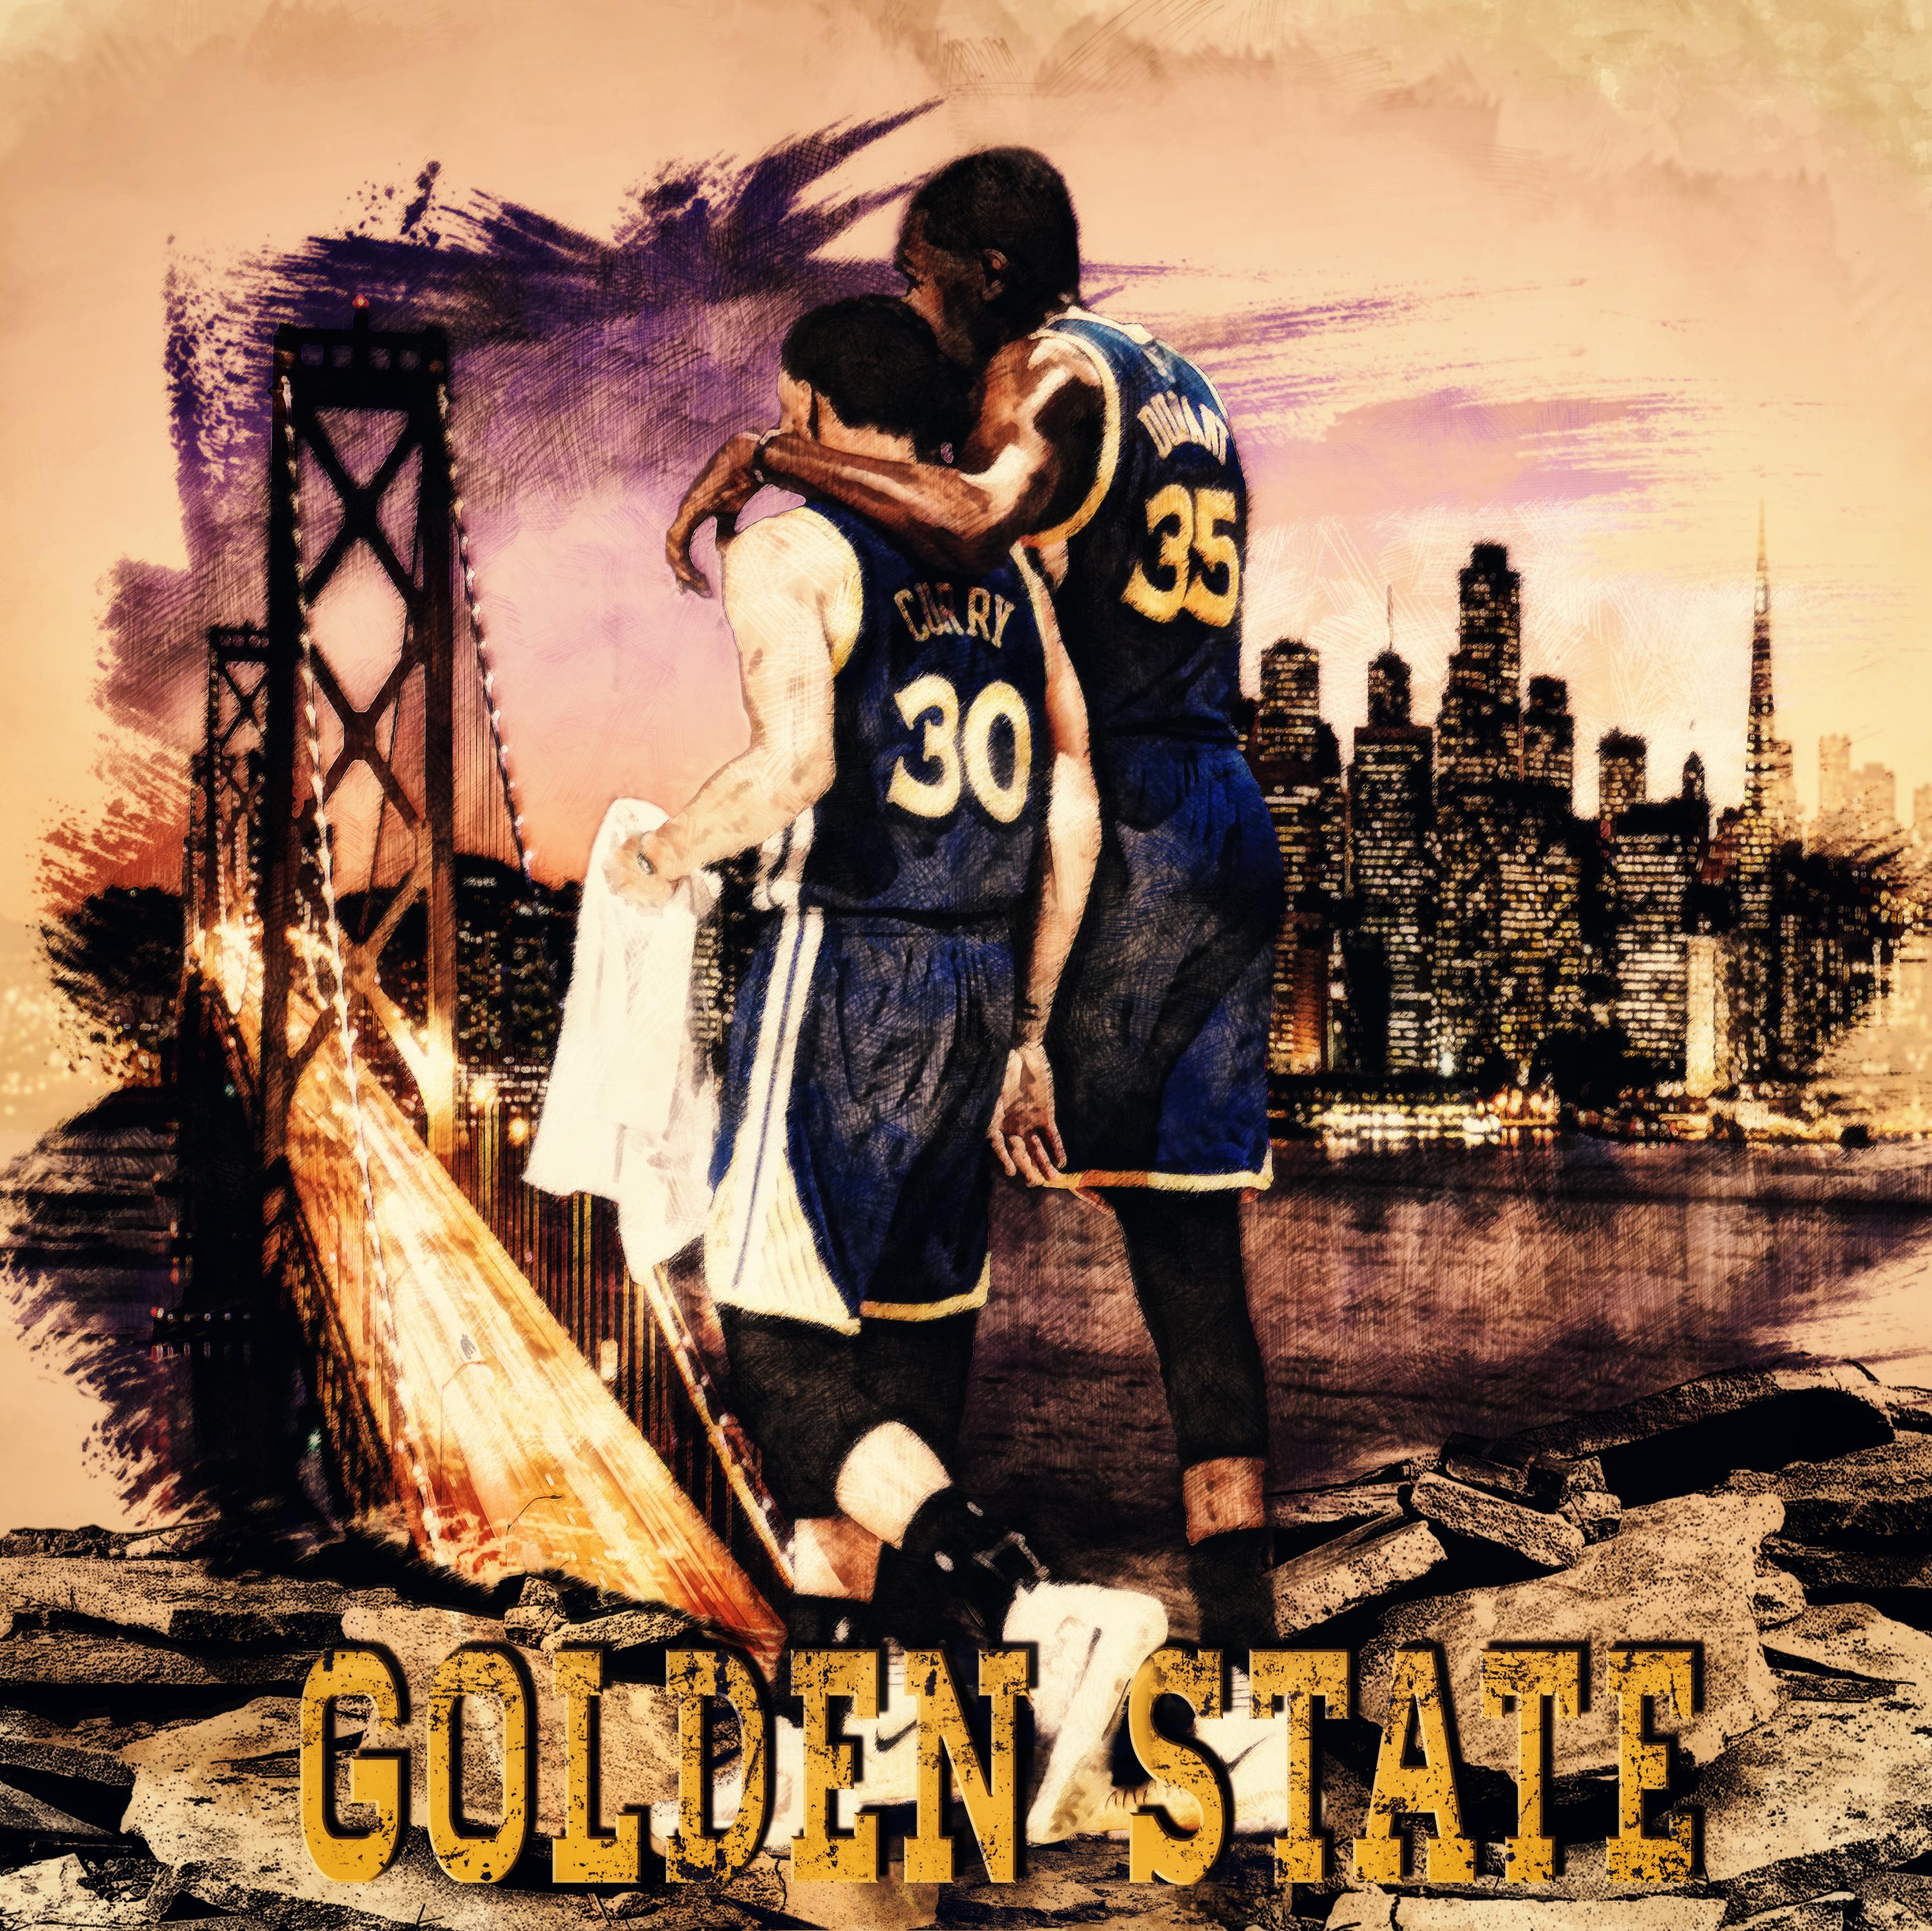 Stephen Curry And Kevin Durant By Aygbmn